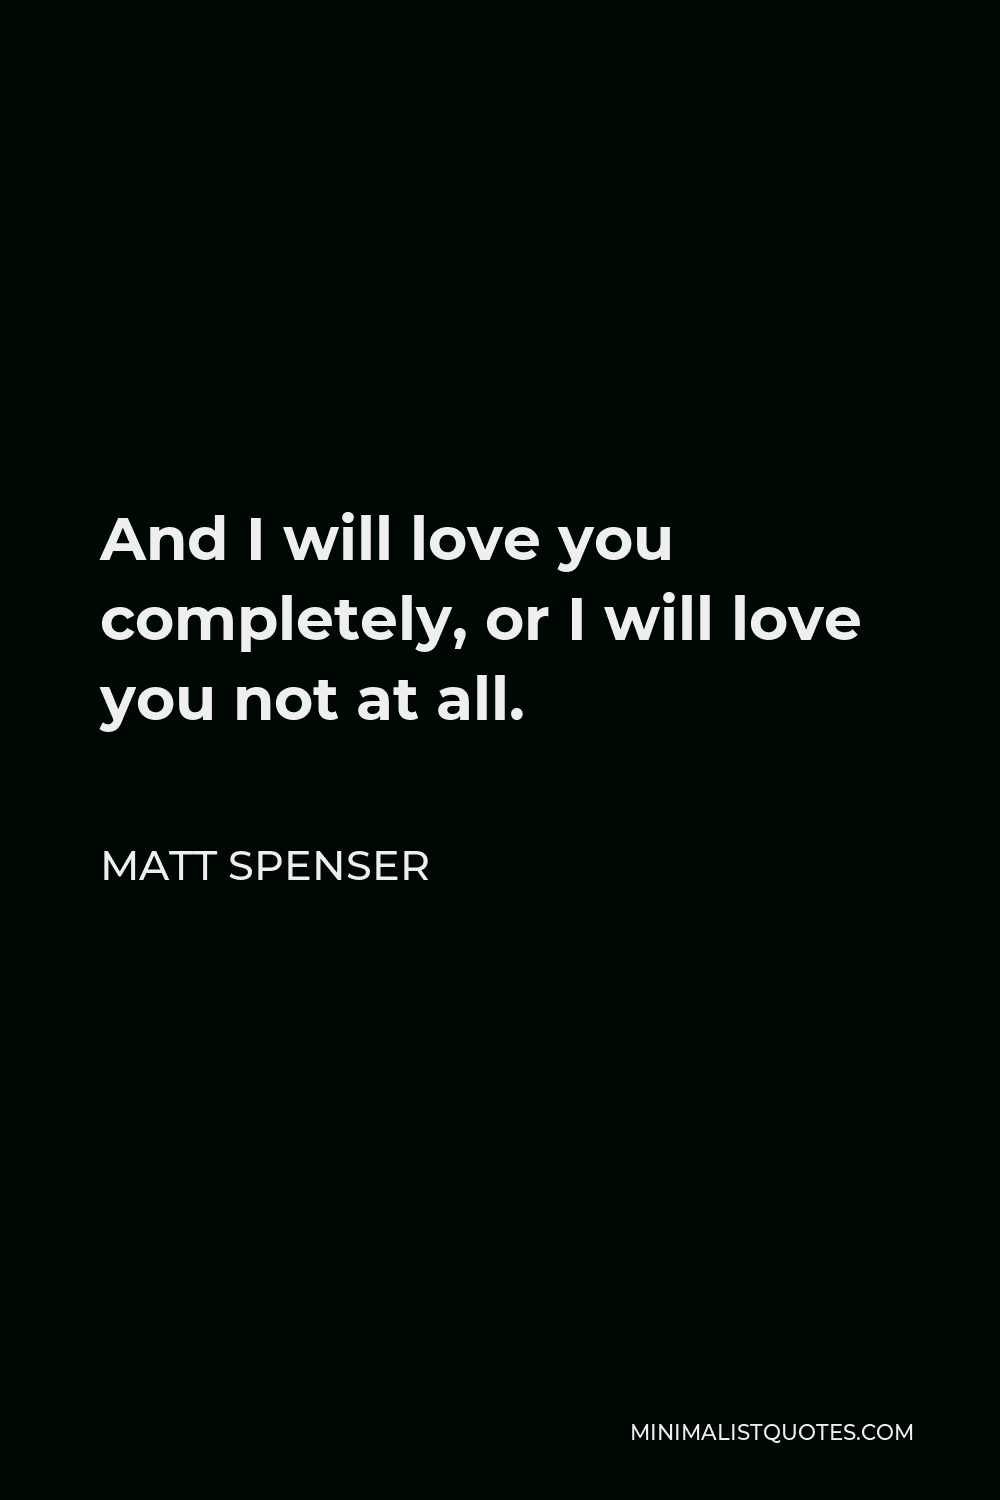 Matt Spenser Quote - And I will love you completely, or I will love you not at all.